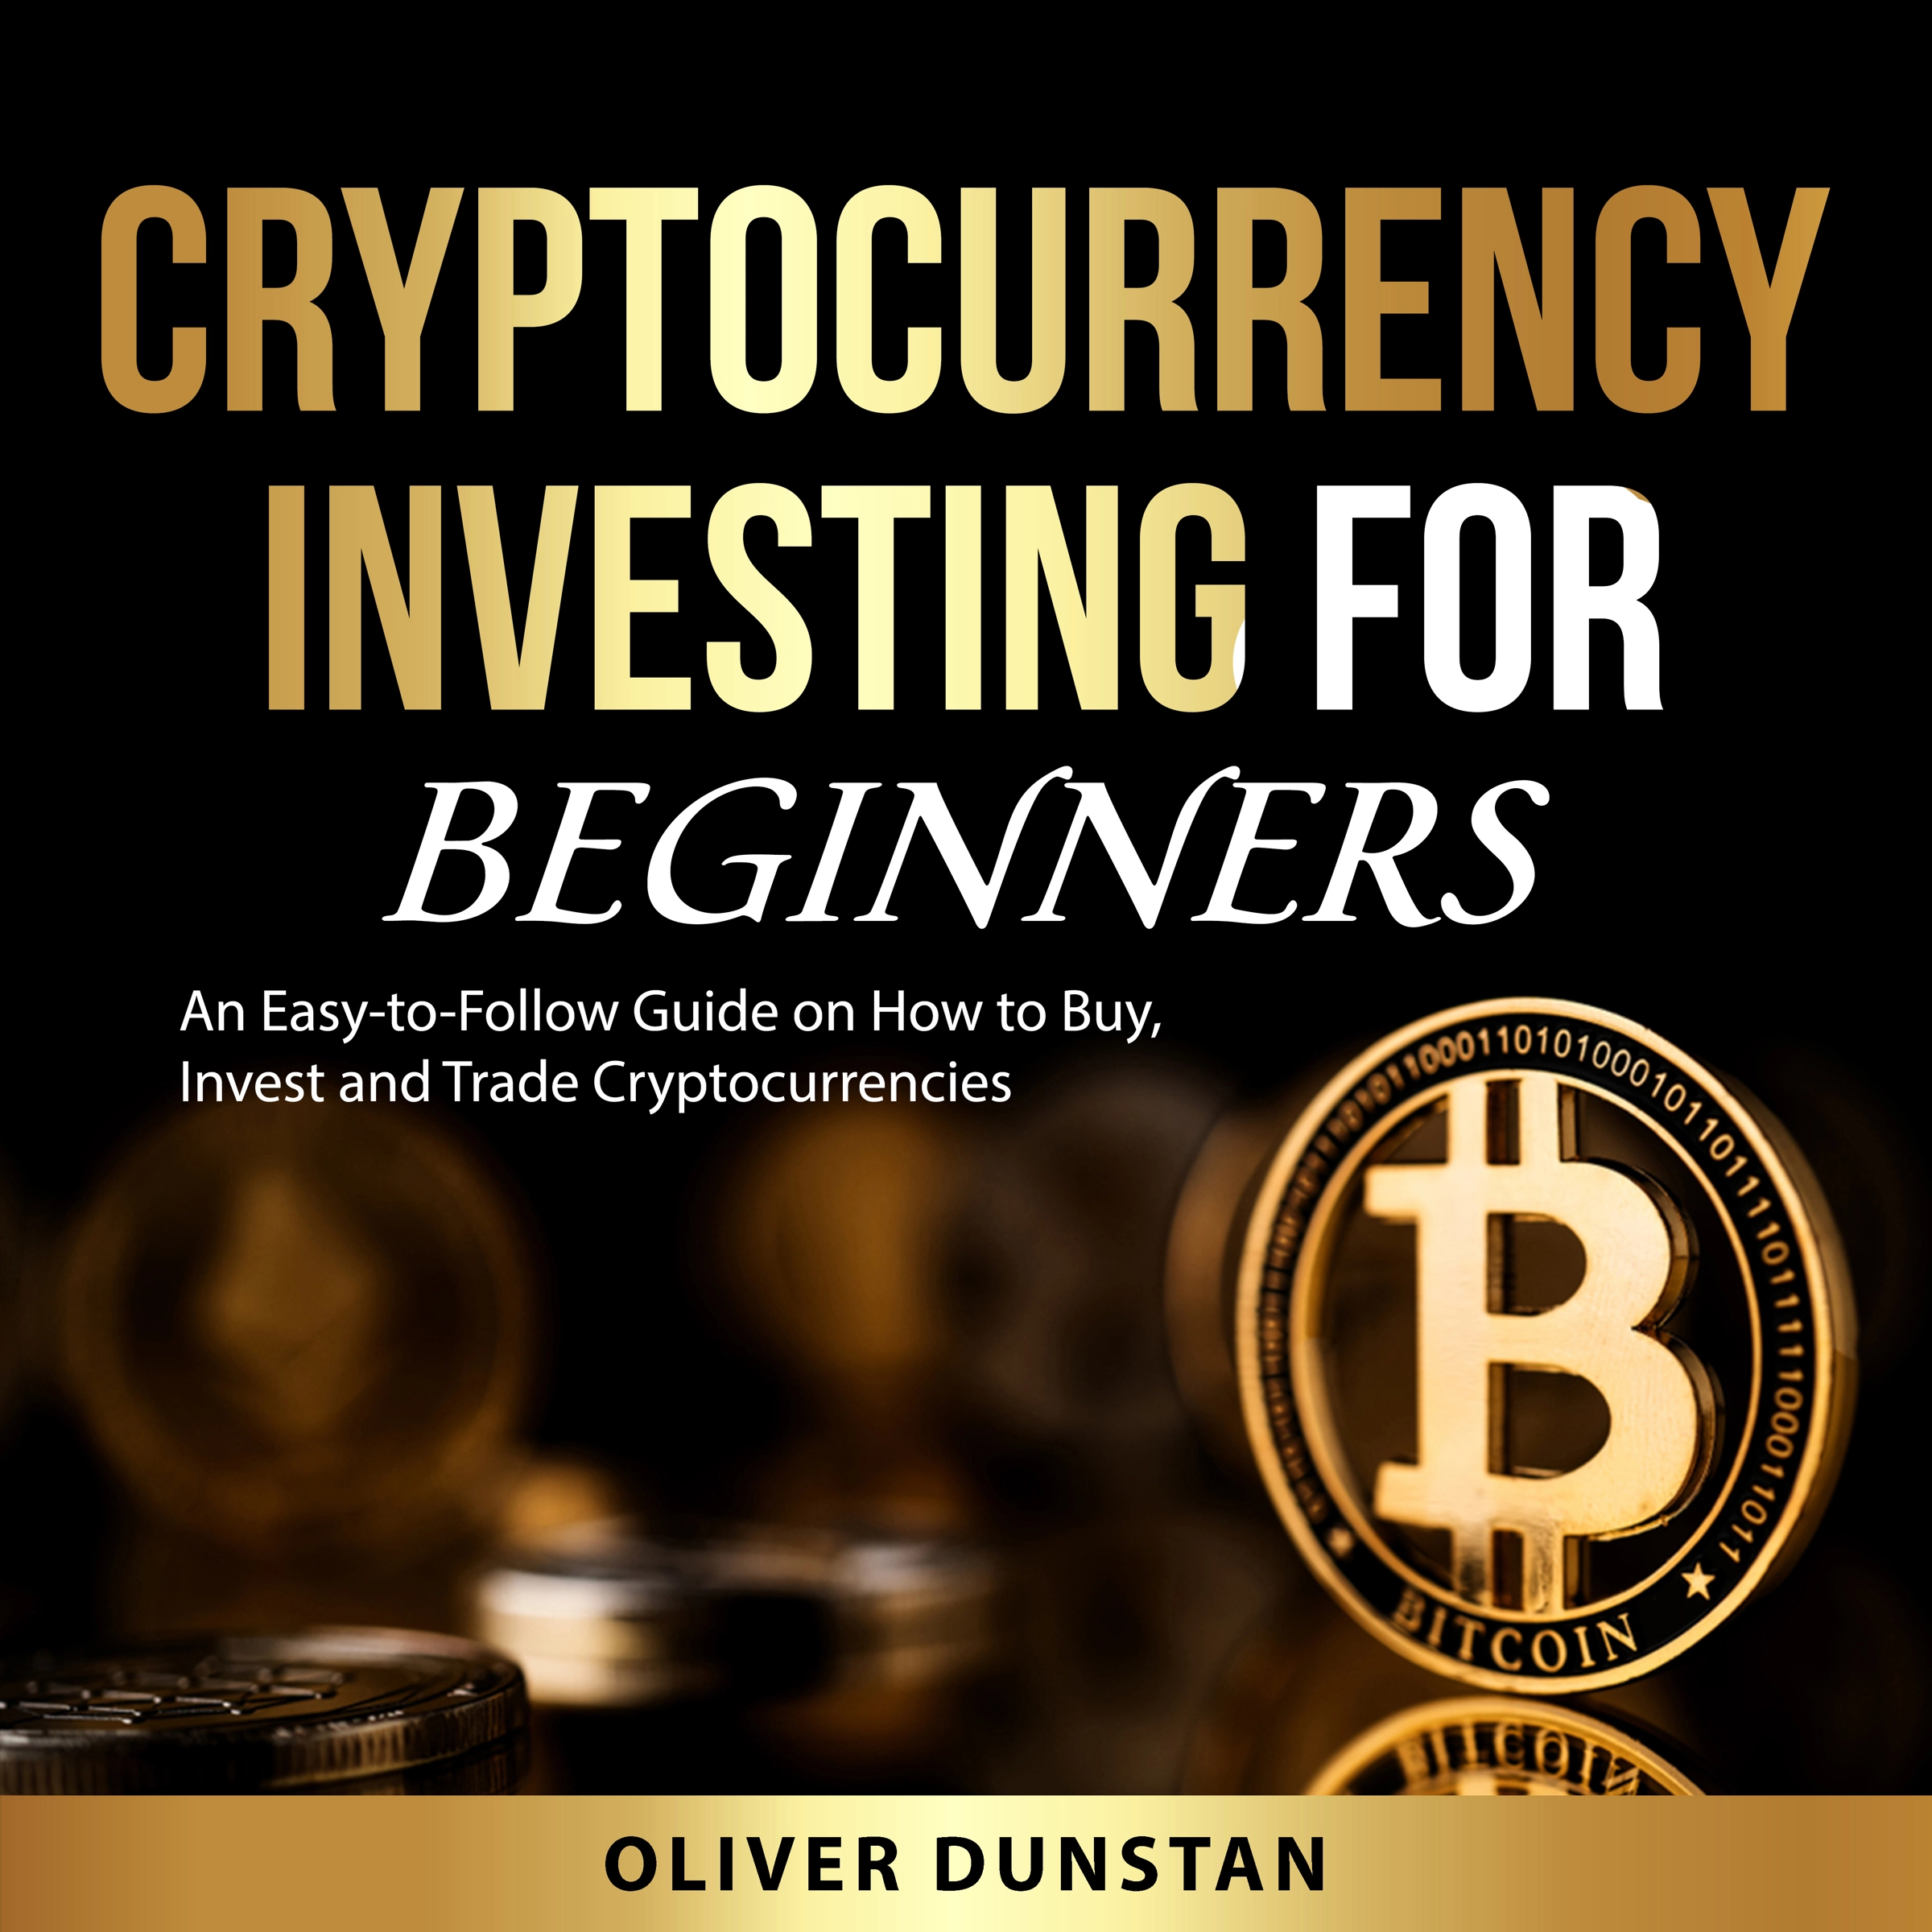 Cryptocurrency Investing for Beginners Audiobook by Oliver Dunstan